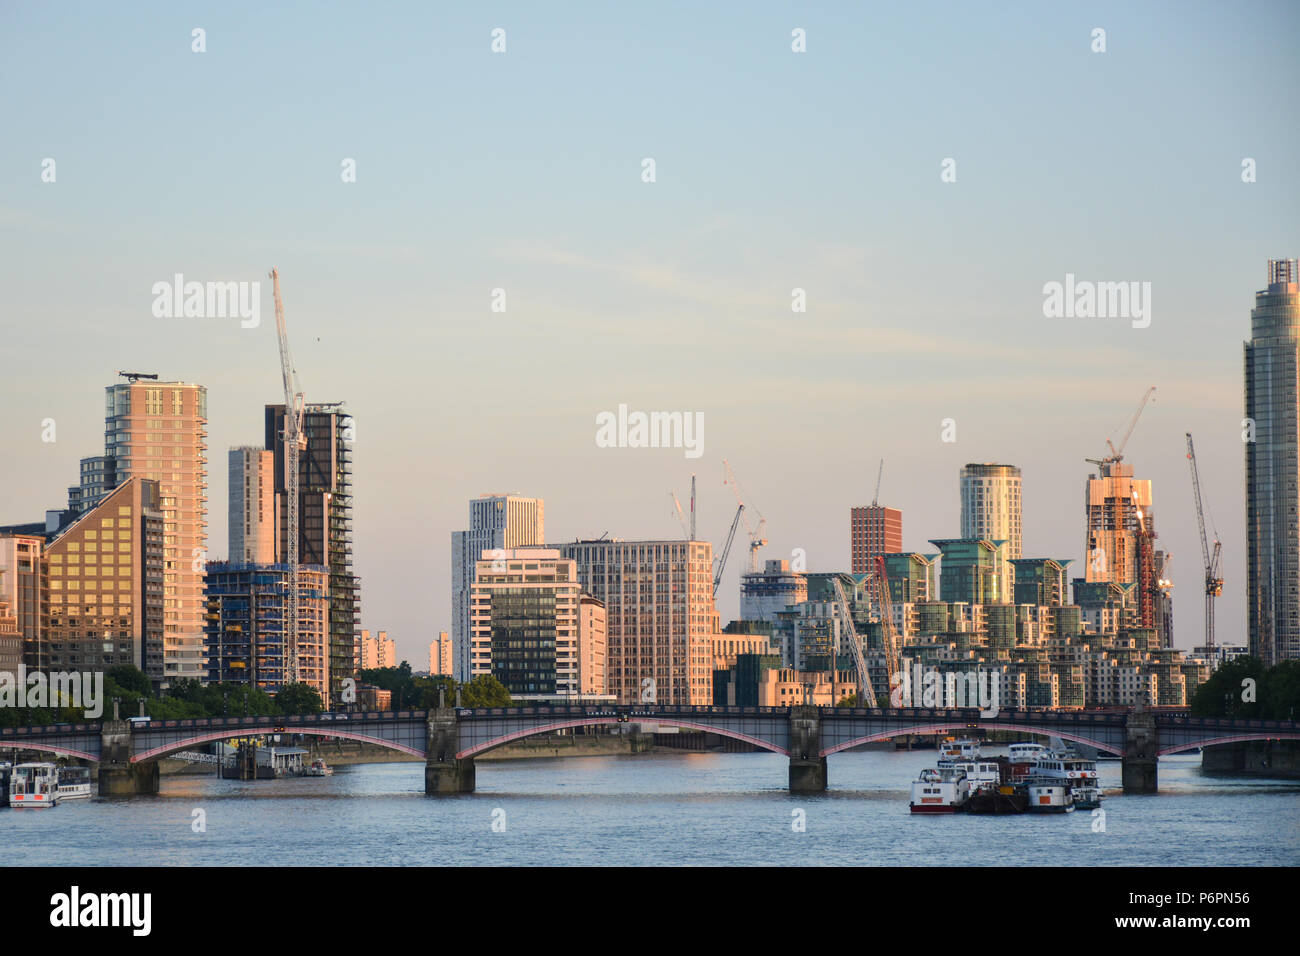 London buildings by the Thames river Stock Photo